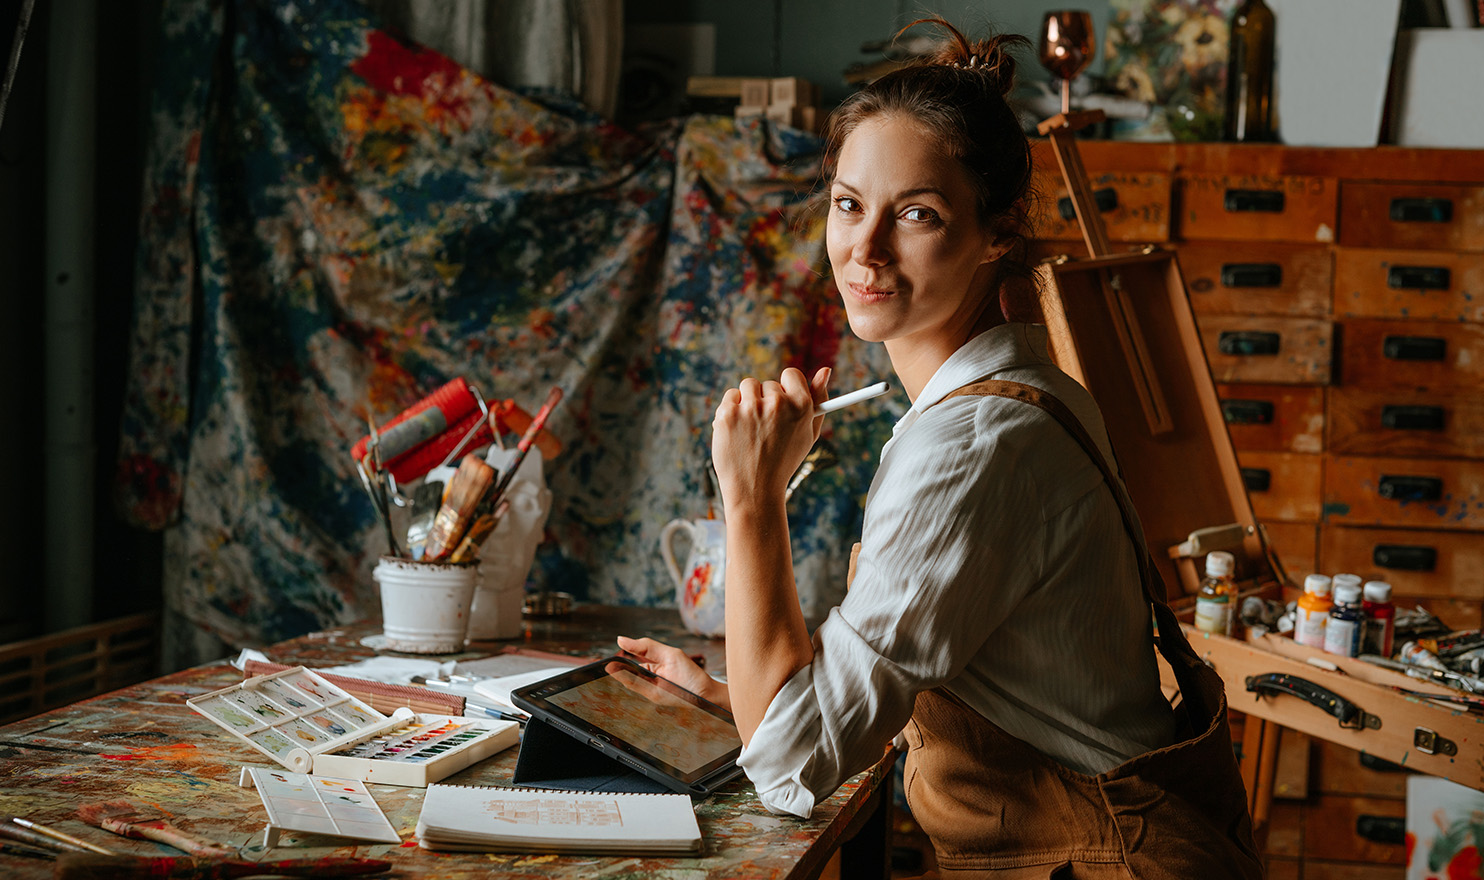 A artist is happily working on a laptop in her painting studio.